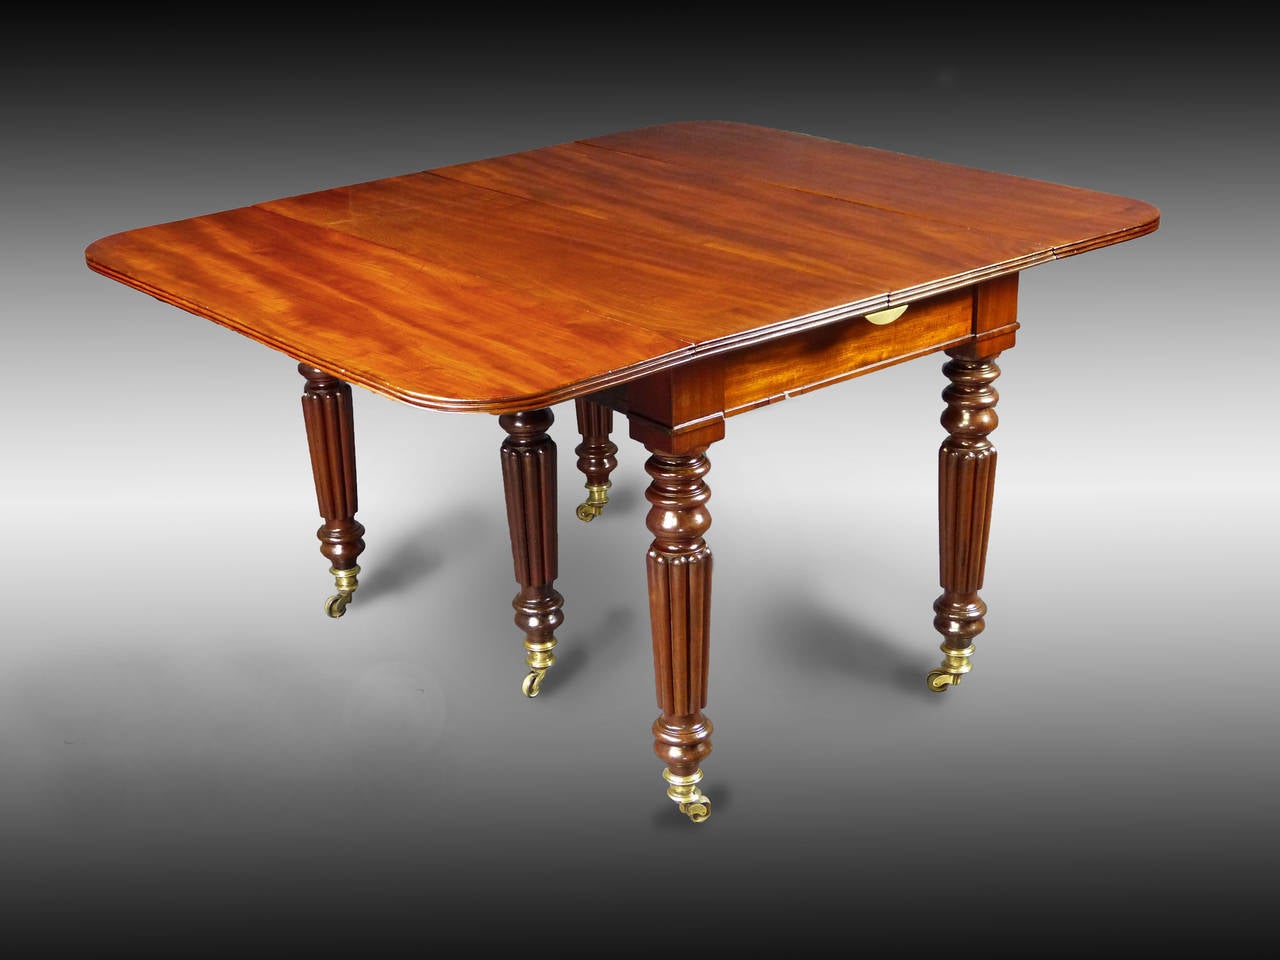 Fine Cuban figured mahogany drop leaf dining table attributed to Gillow, one of England's great cabinetmakers.The table is very versatile and may be extended with 2 additional leaves. In the center it is further supported by a central leg. All 5